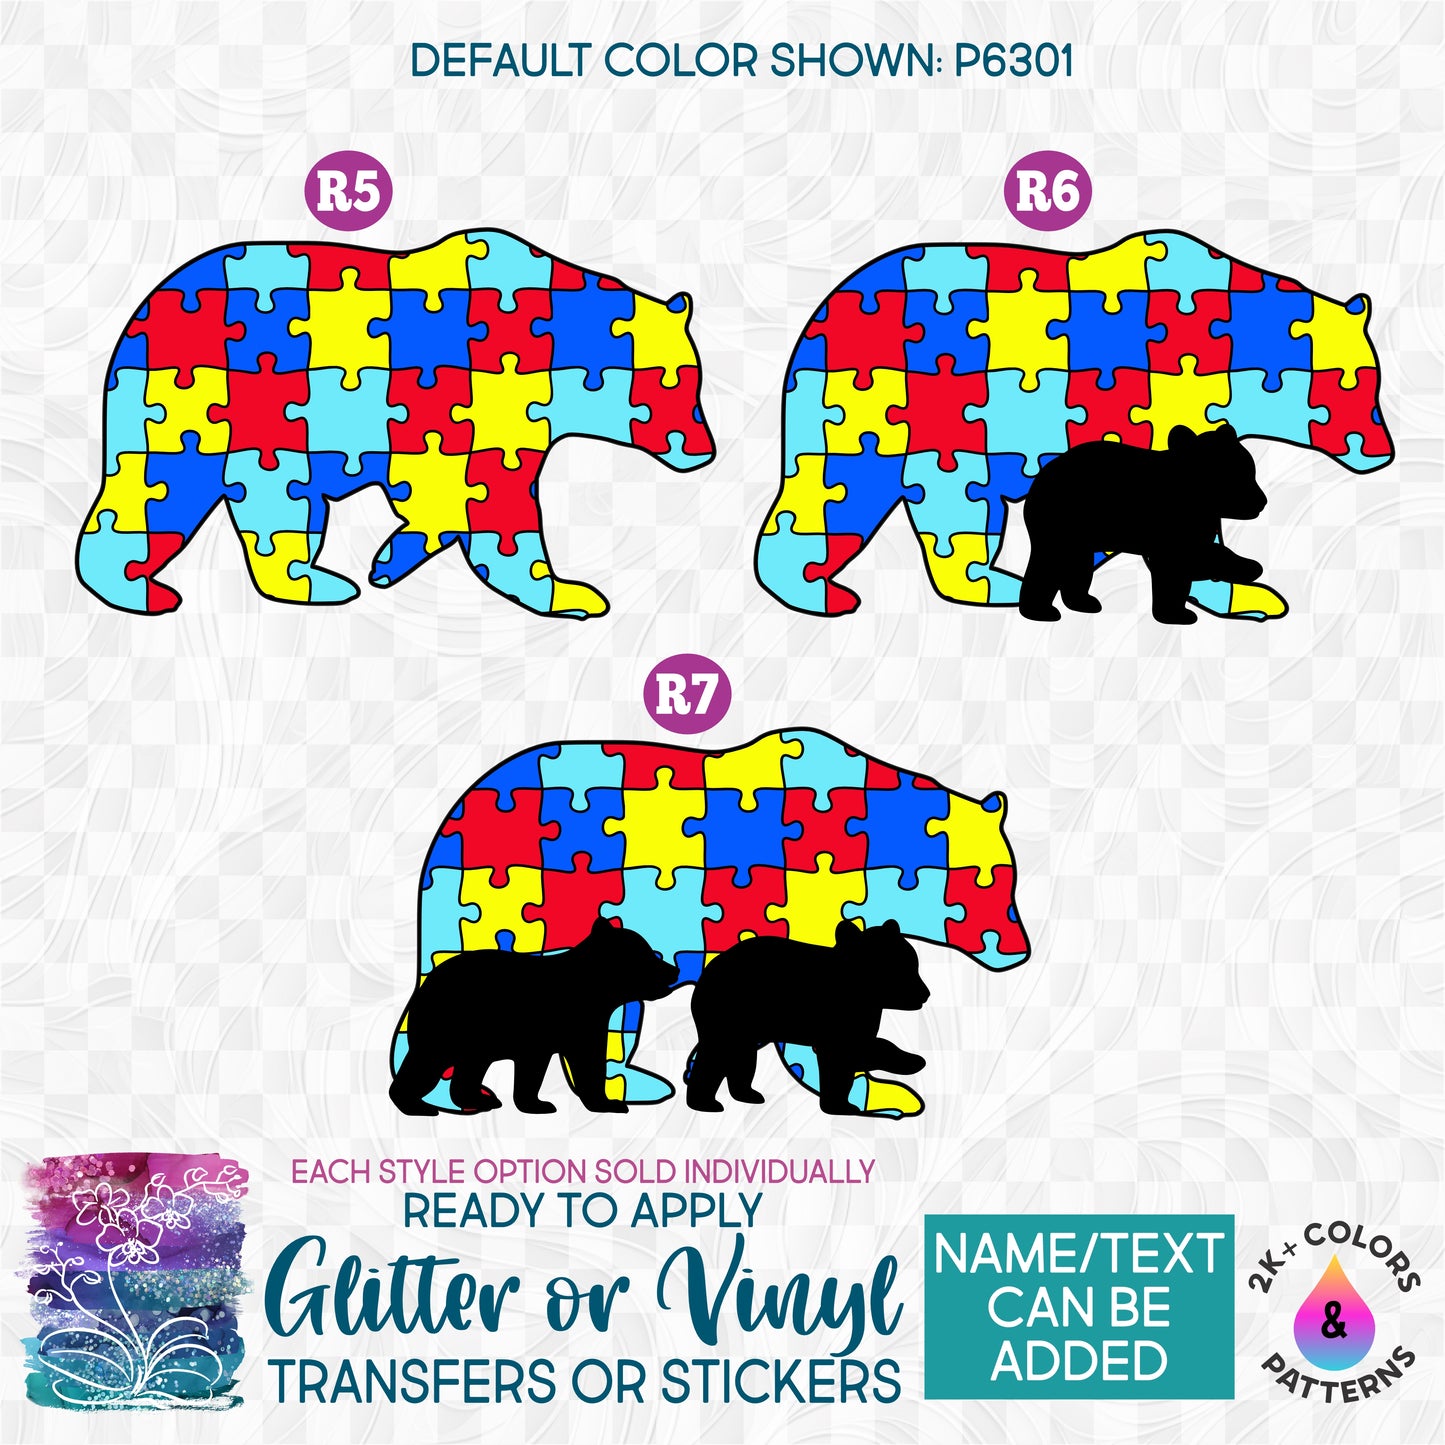 (s232-R) Adult Bear 1 2 Baby Little Bears Cub Cubs Autism Puzzle Glitter or Vinyl Iron-On Transfer or Sticker